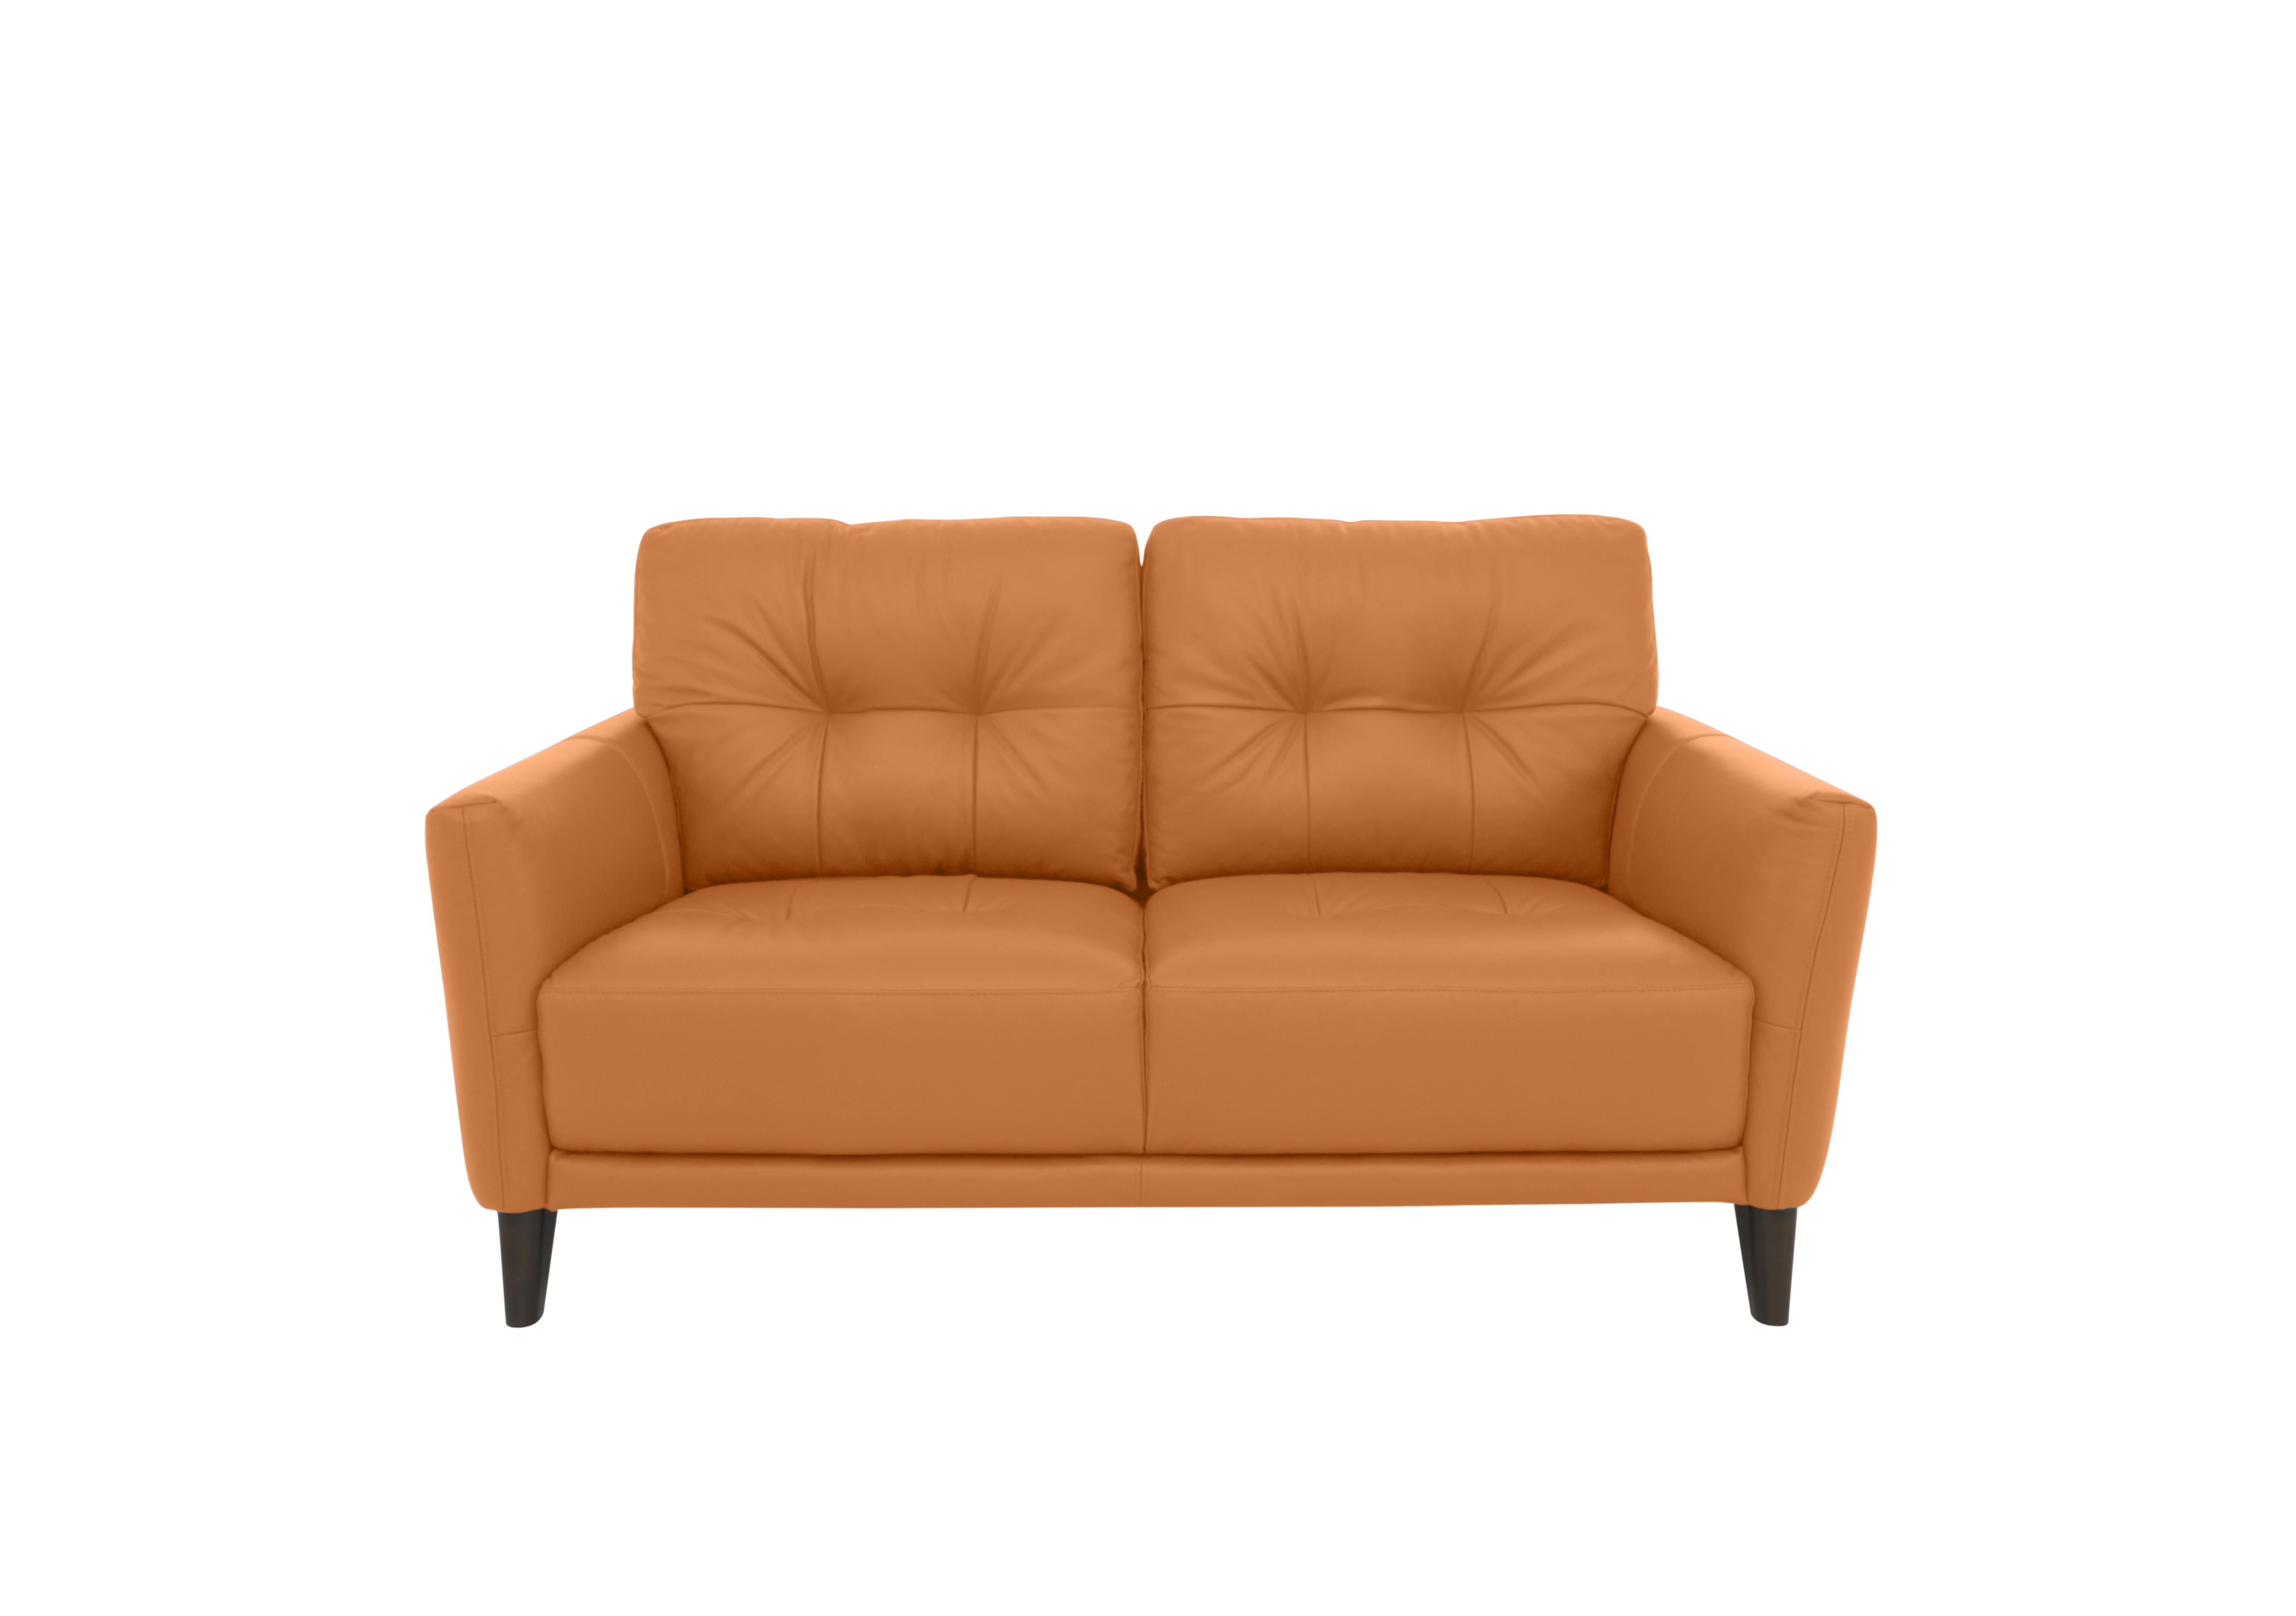 Uno Leather 2 Seater Sofa in Bv-335e Honey Yellow on Furniture Village